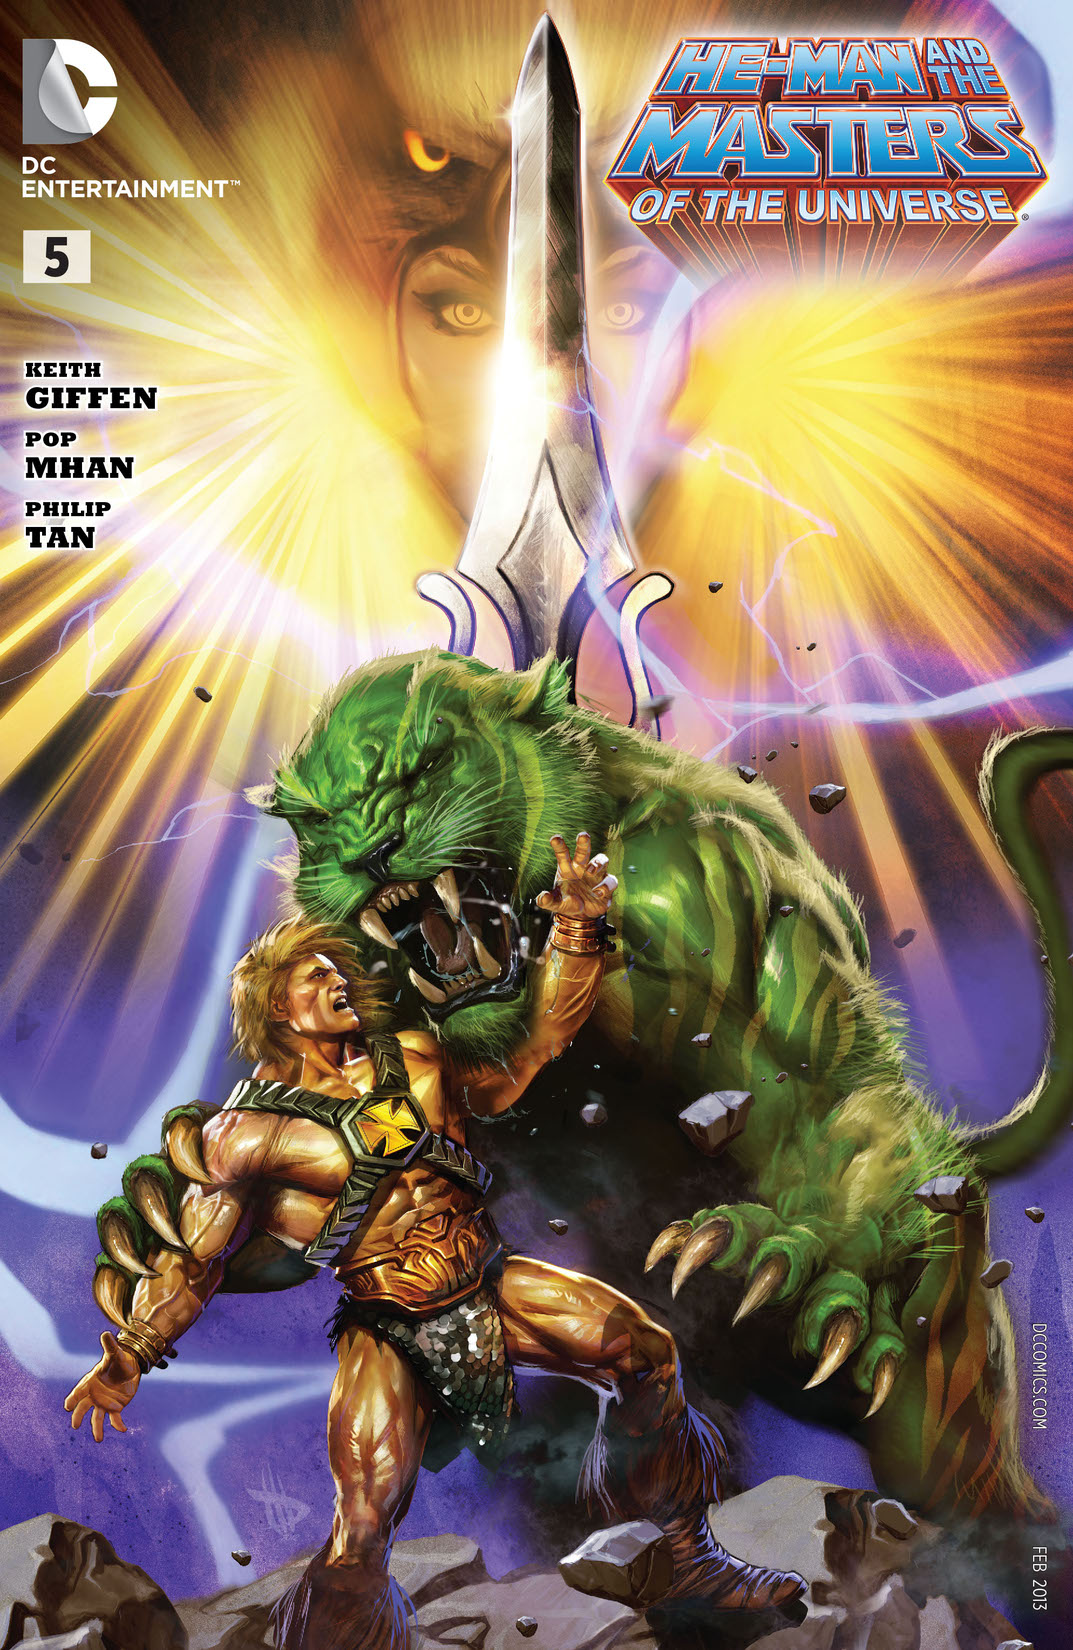 He-Man and the Masters of the Universe #5 preview images